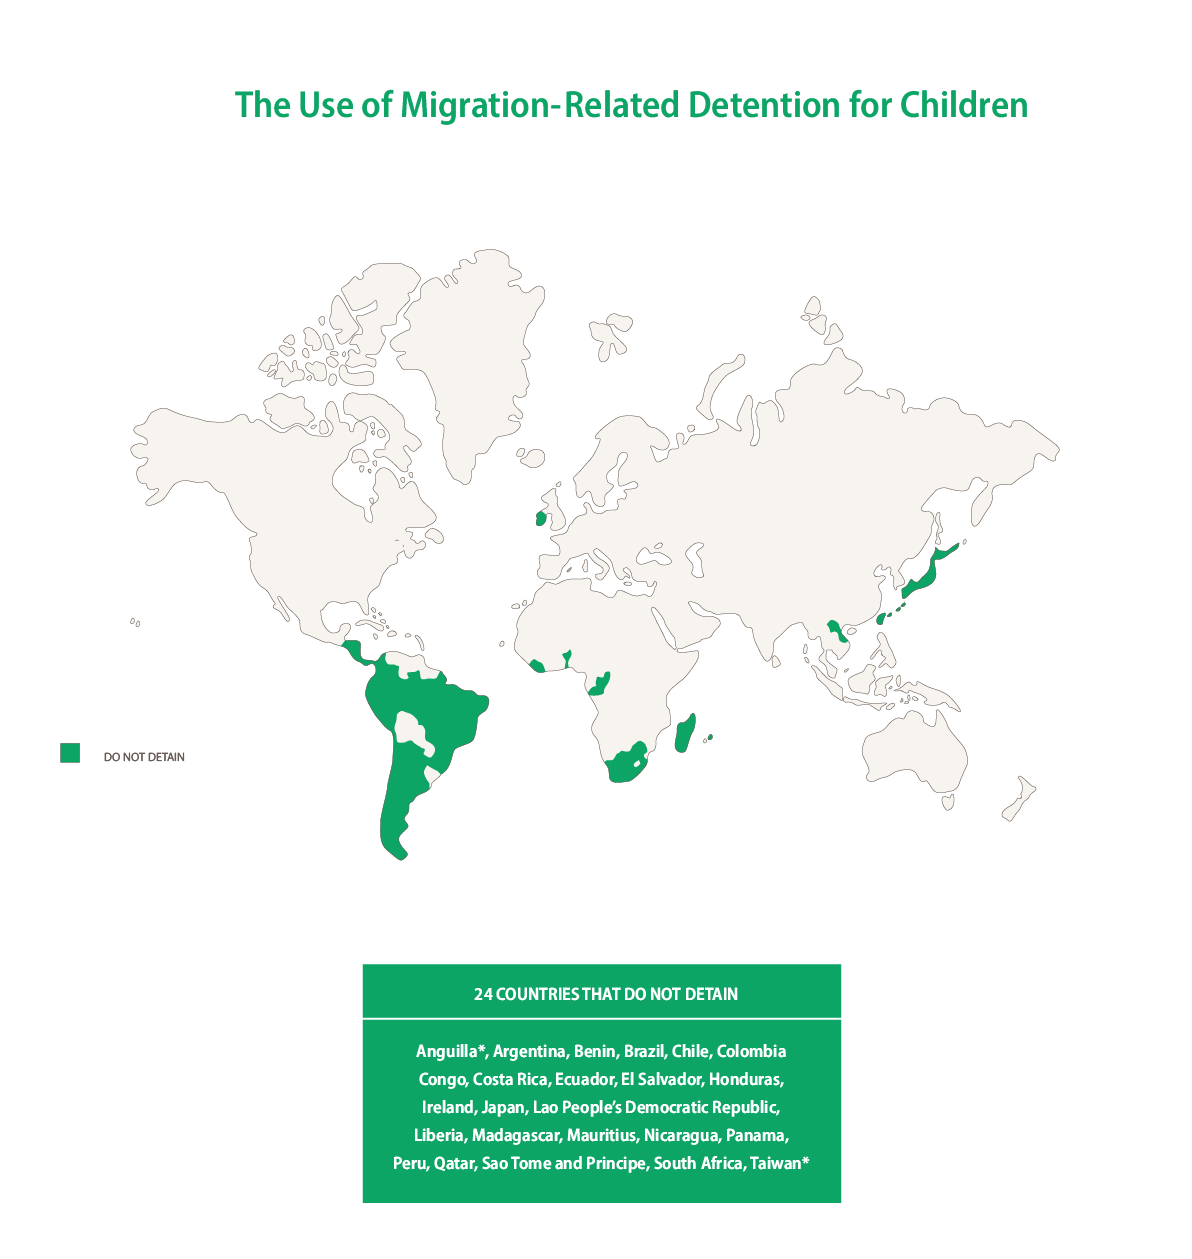 The Use of Migration-related Detention for Children_infographic_01_04